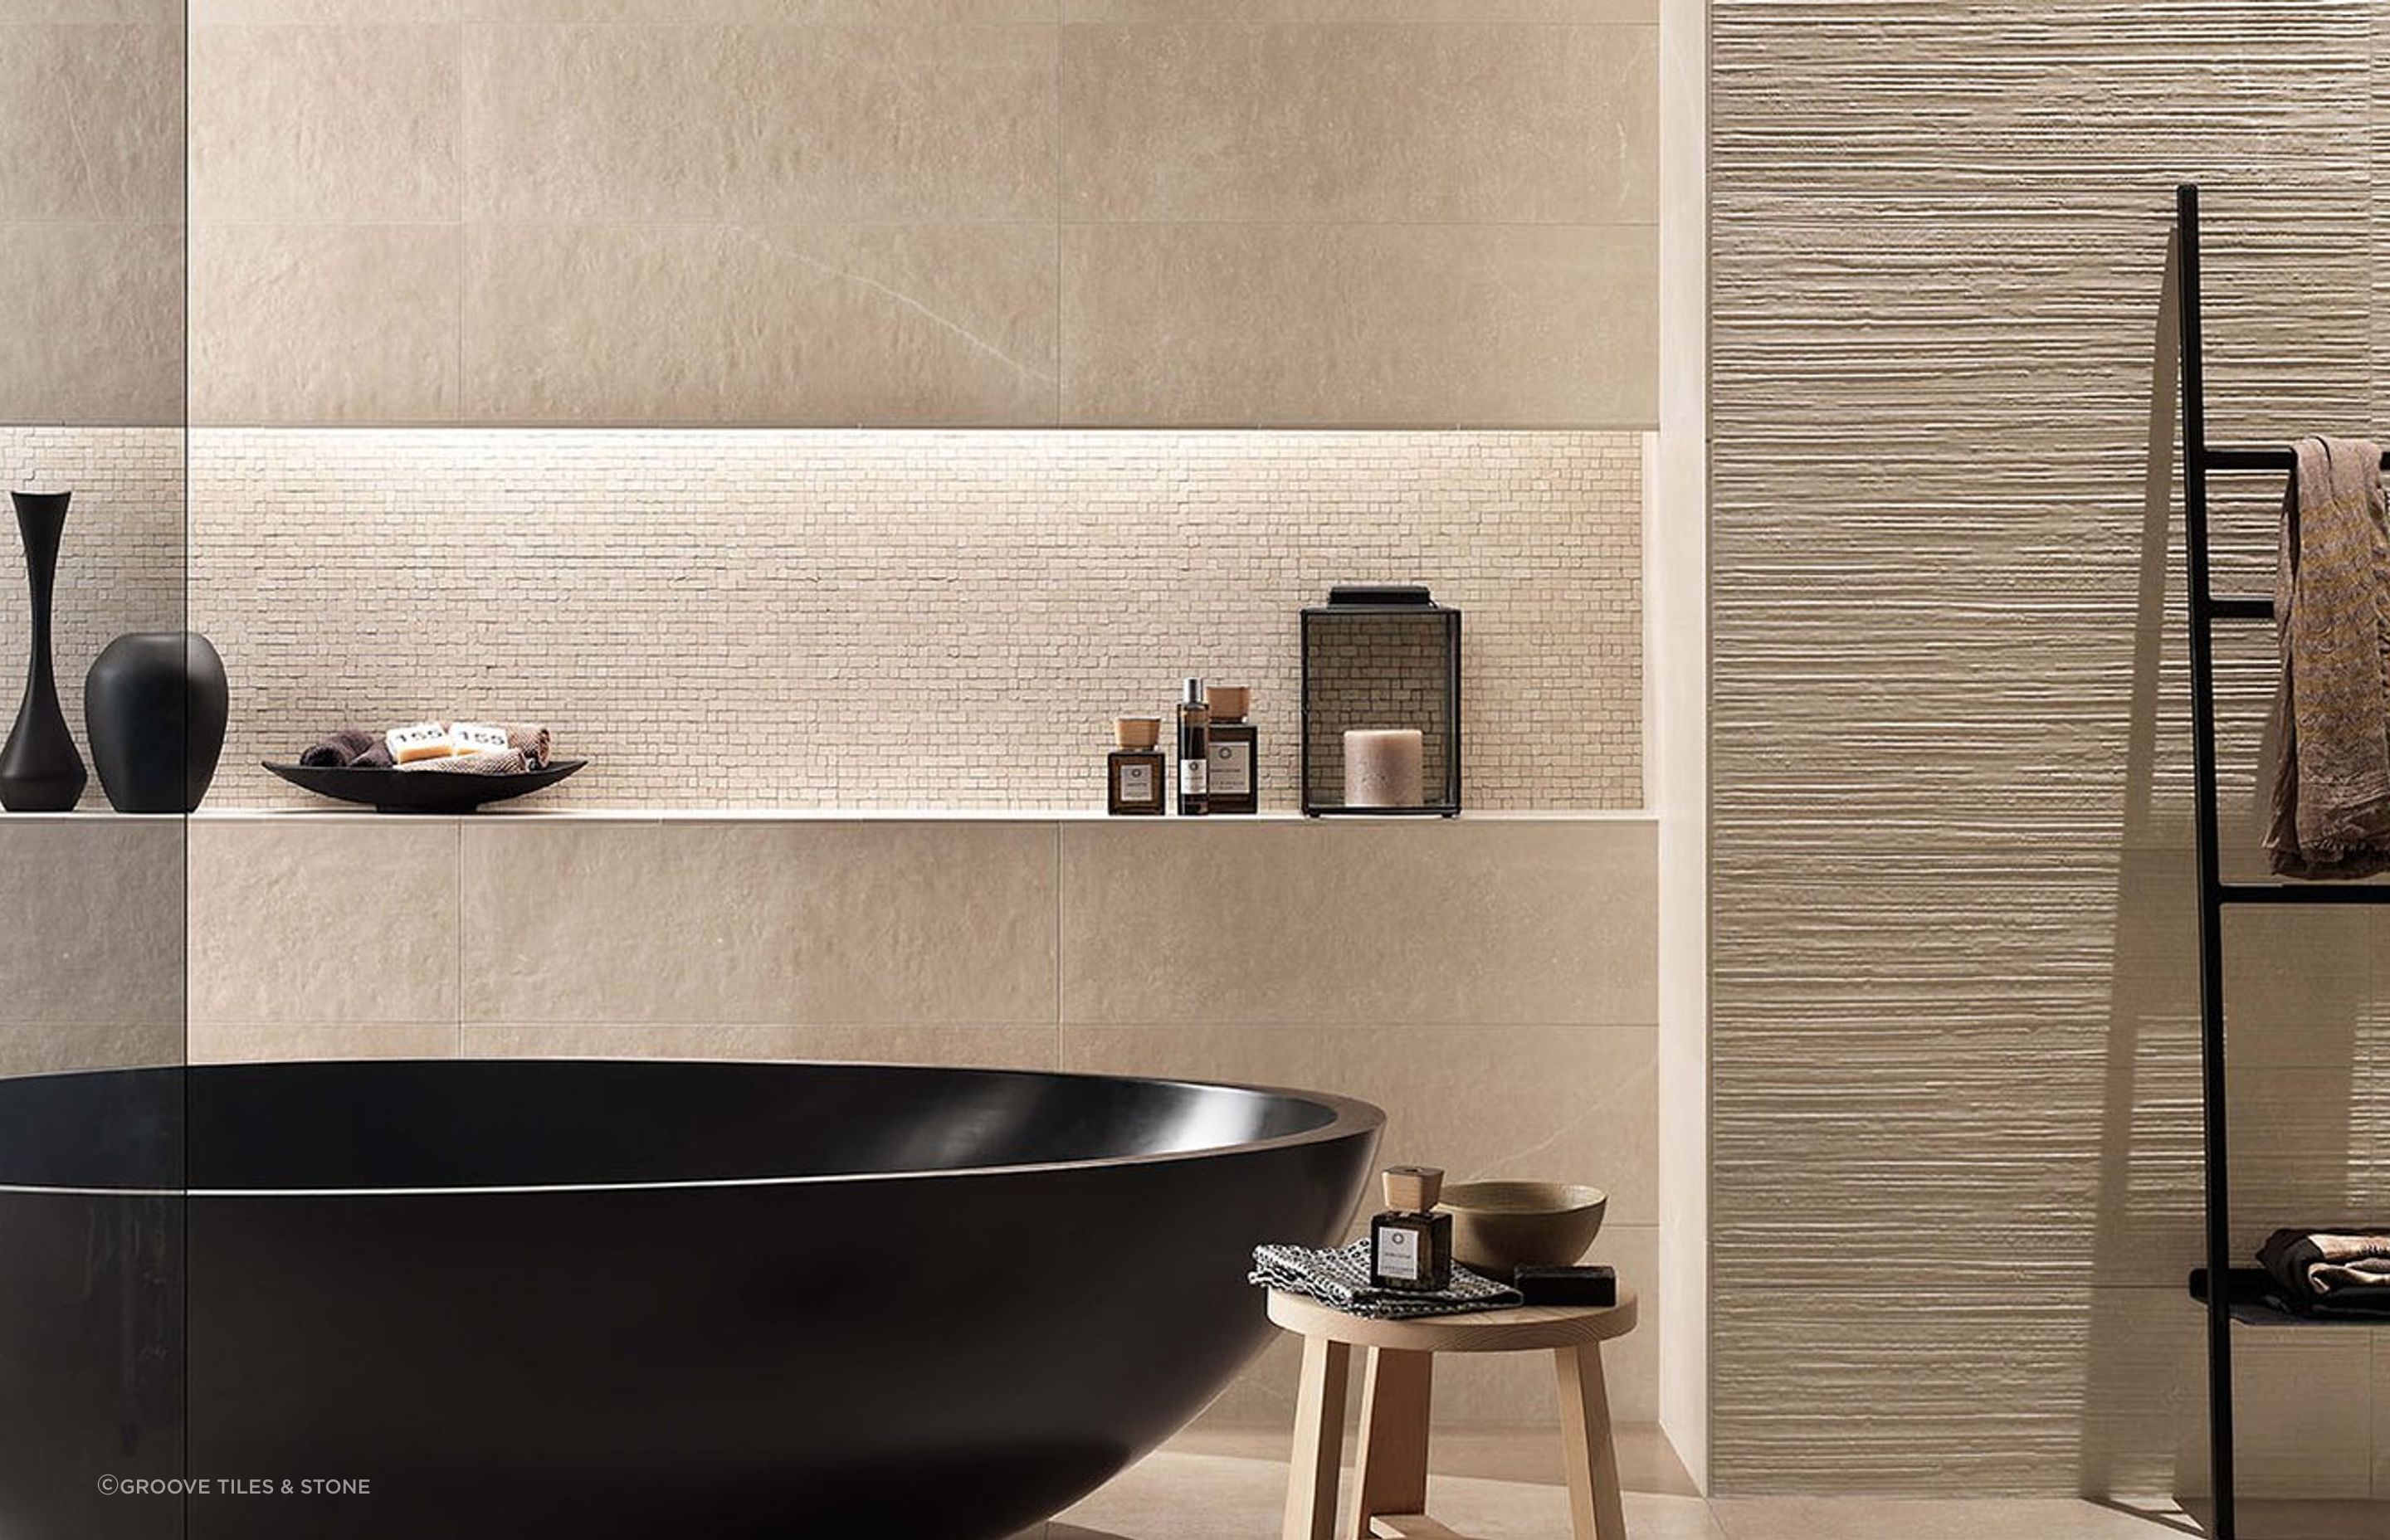 Maku Floor and Wall Tiles - a fine example of porcelain stoneware from Groove Tiles &amp; Stone